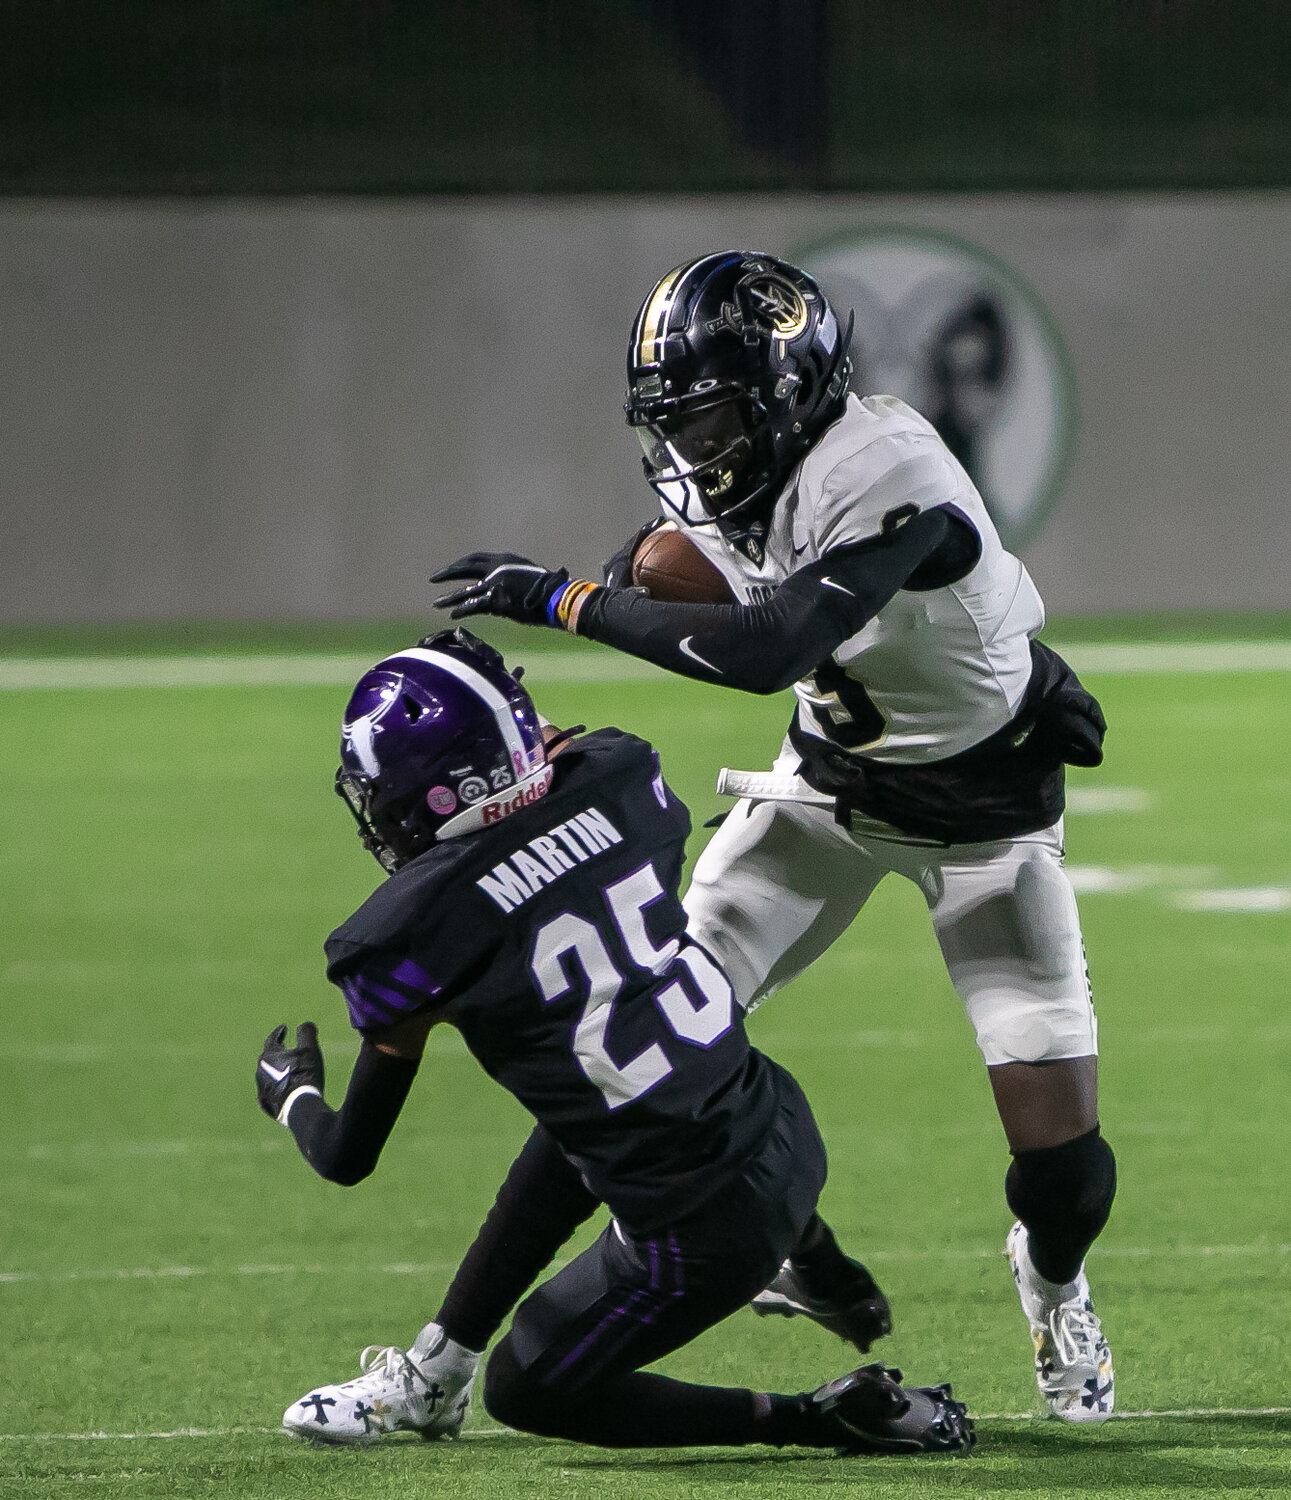 Andrew Marsh stiff arms a defender during Thursday's game between Jordan and Morton Ranch at Legacy Stadium.